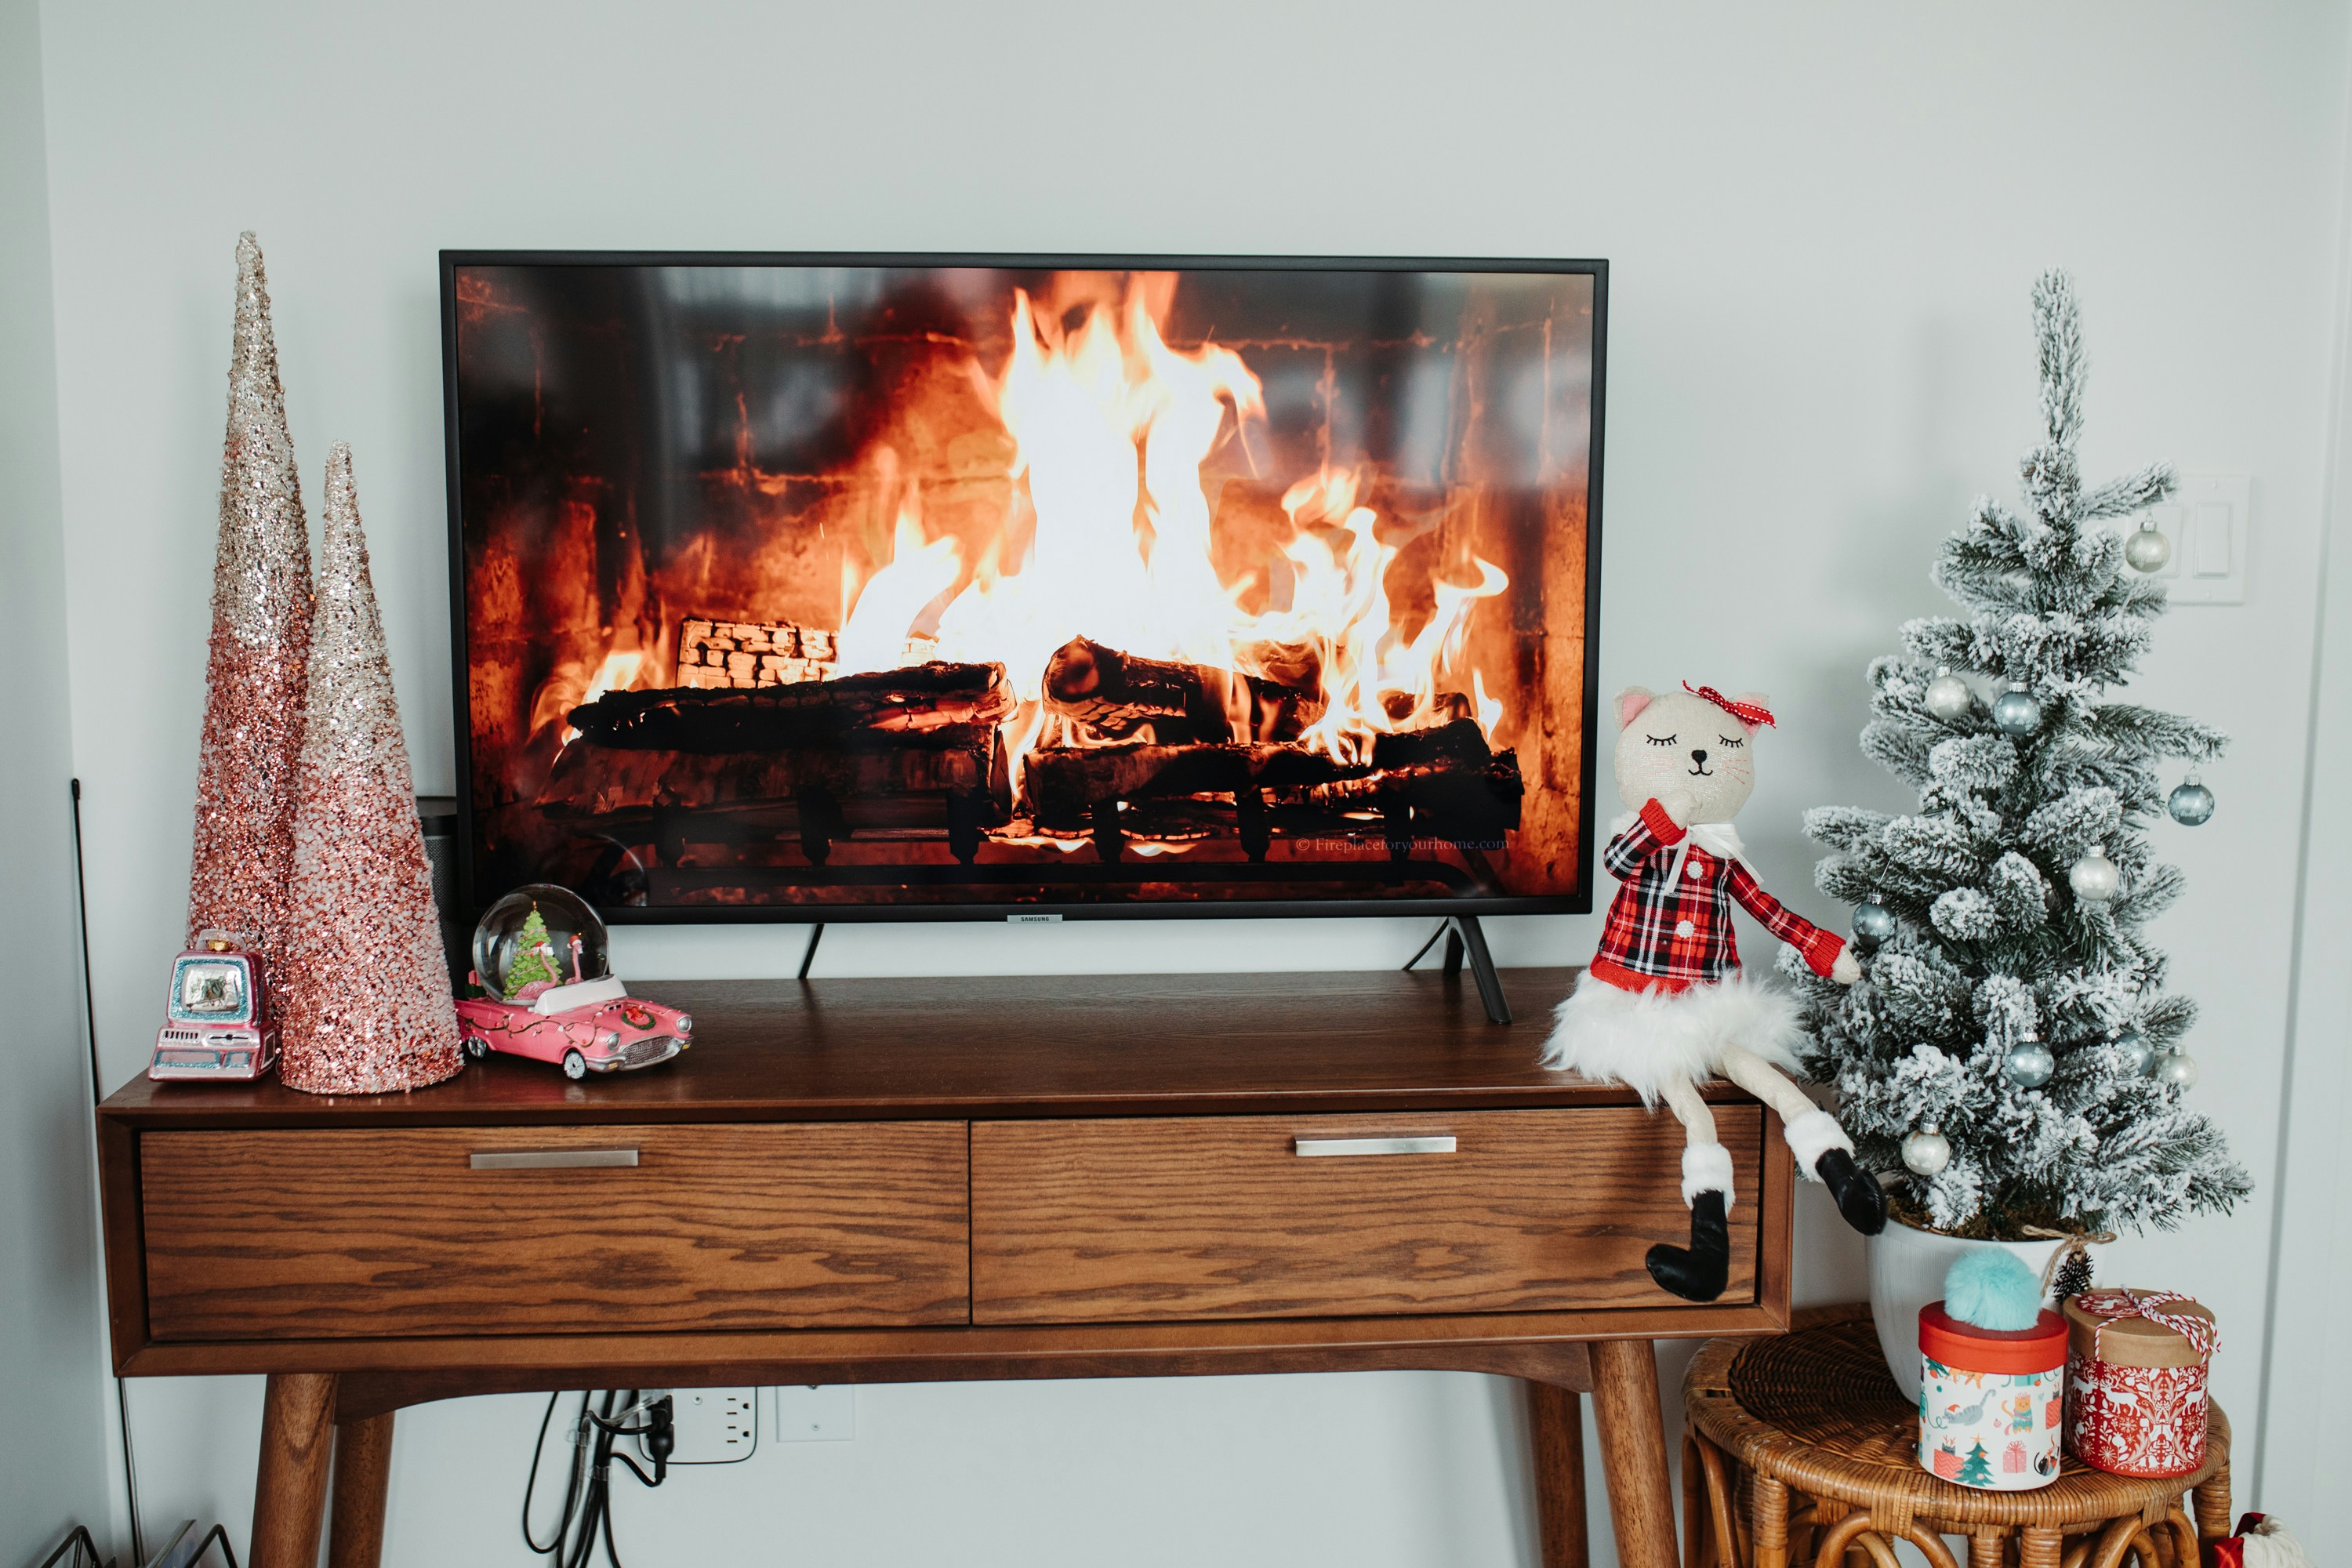 How to decorate your TV stand for Christmas